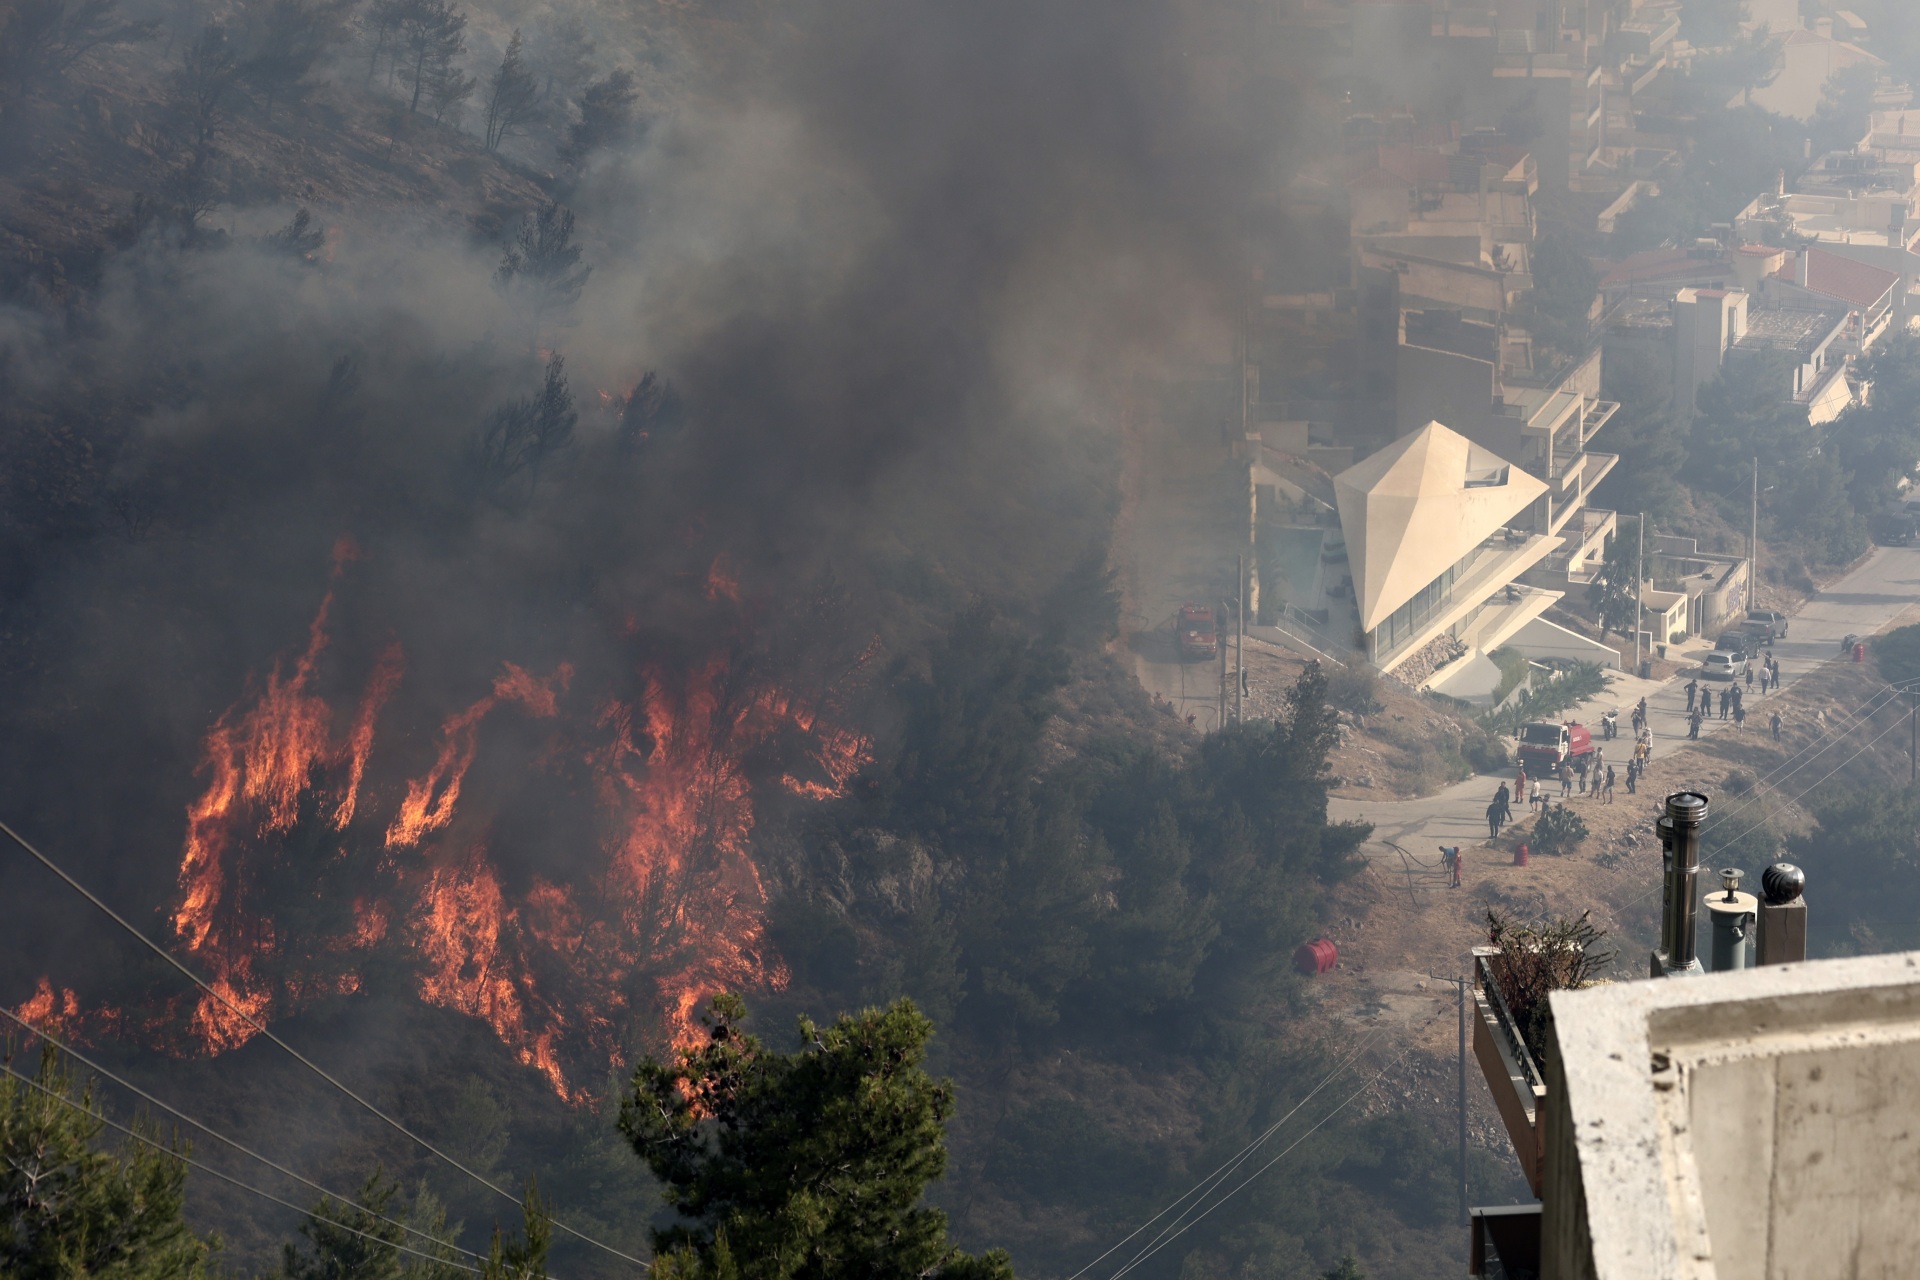 Flames burn trees on a hill as people look on during a wildfire in Voula suburb, in southern Athens, Greece, Saturday, June 4, 2022. (AP Photo/Yorgos Karahalis)